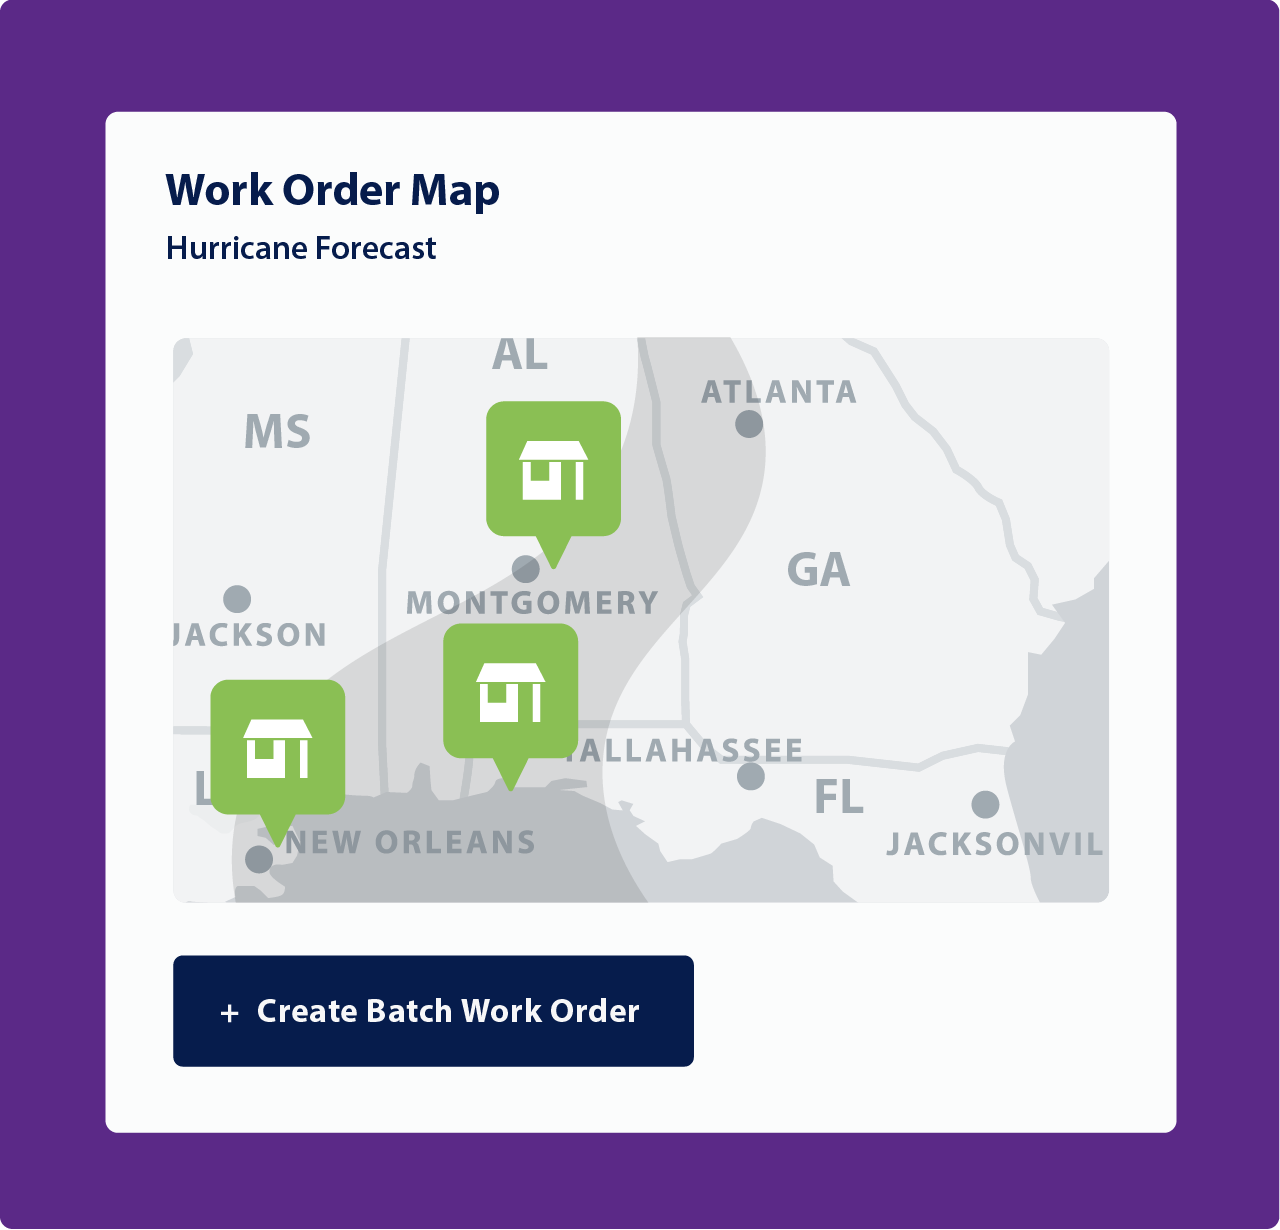 Work Orders mapped out over United States within software platform